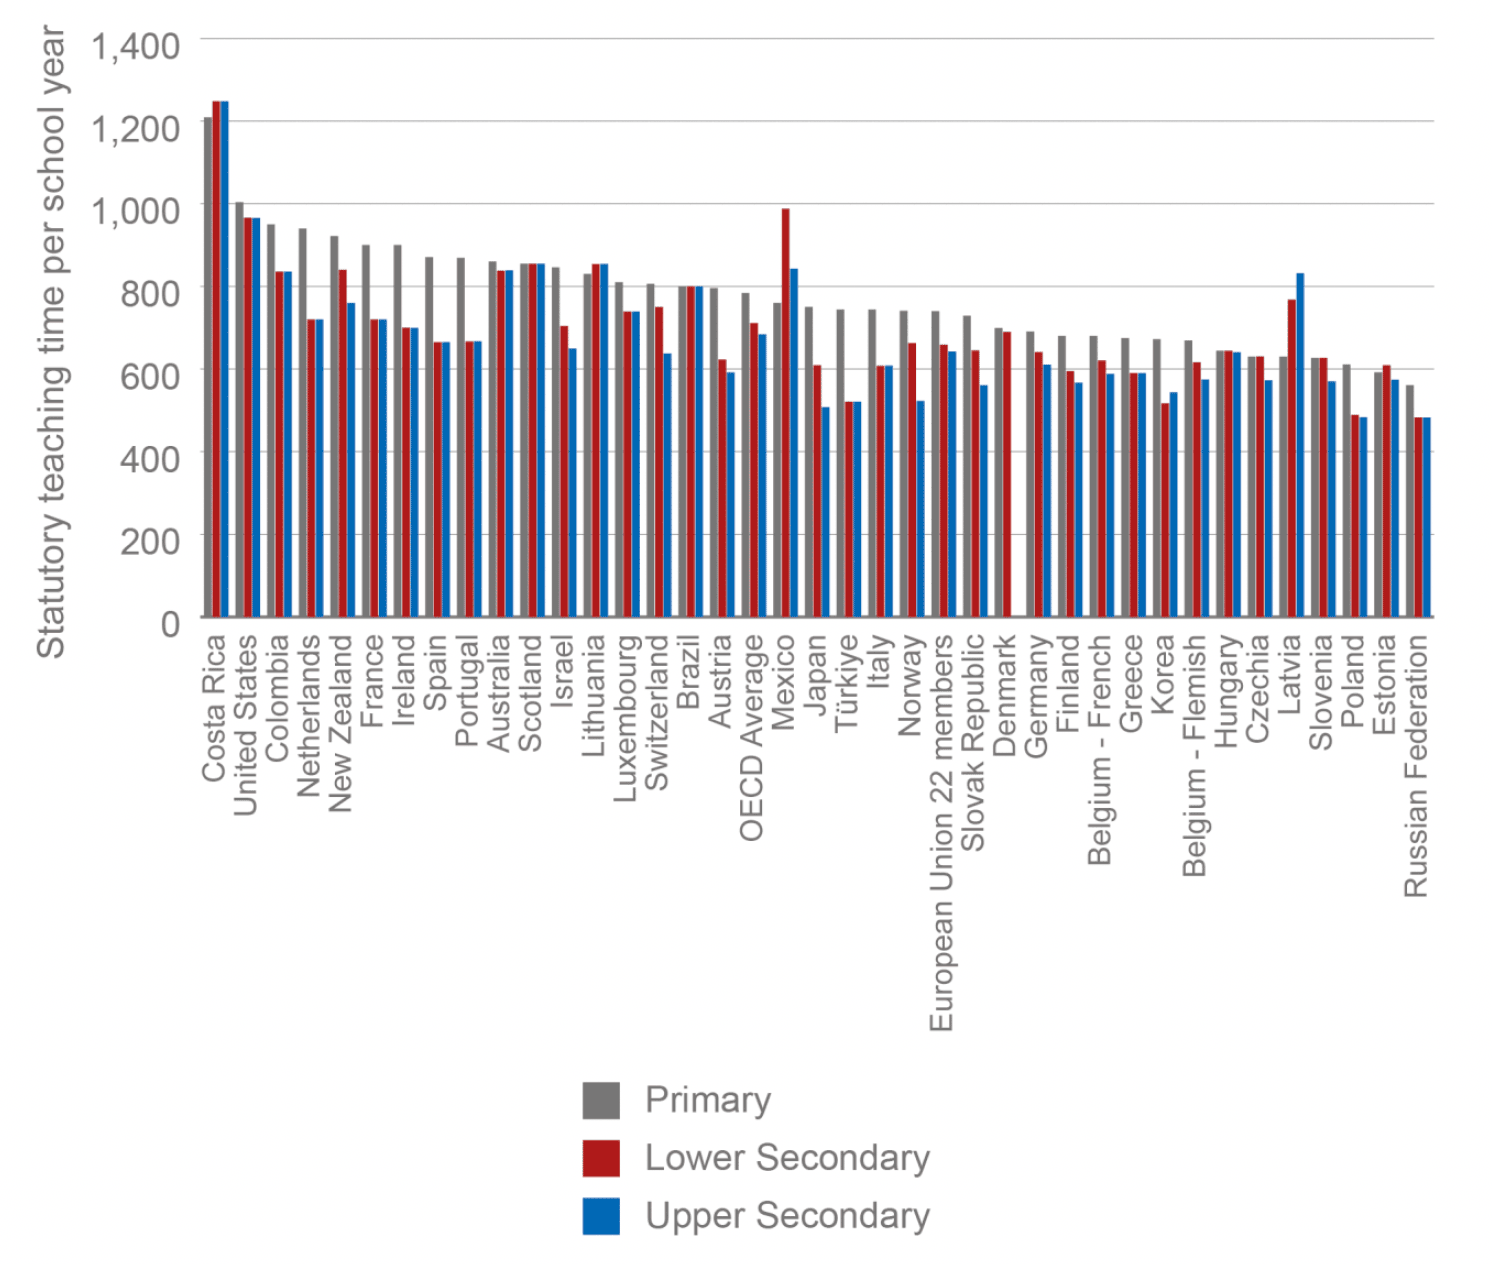 Clustered column chart showing an international comparison of statutory teaching time, divided by primary, lower and upper secondary. Scotland has the same statutory time for each division, and ranks higher than the OECD average.